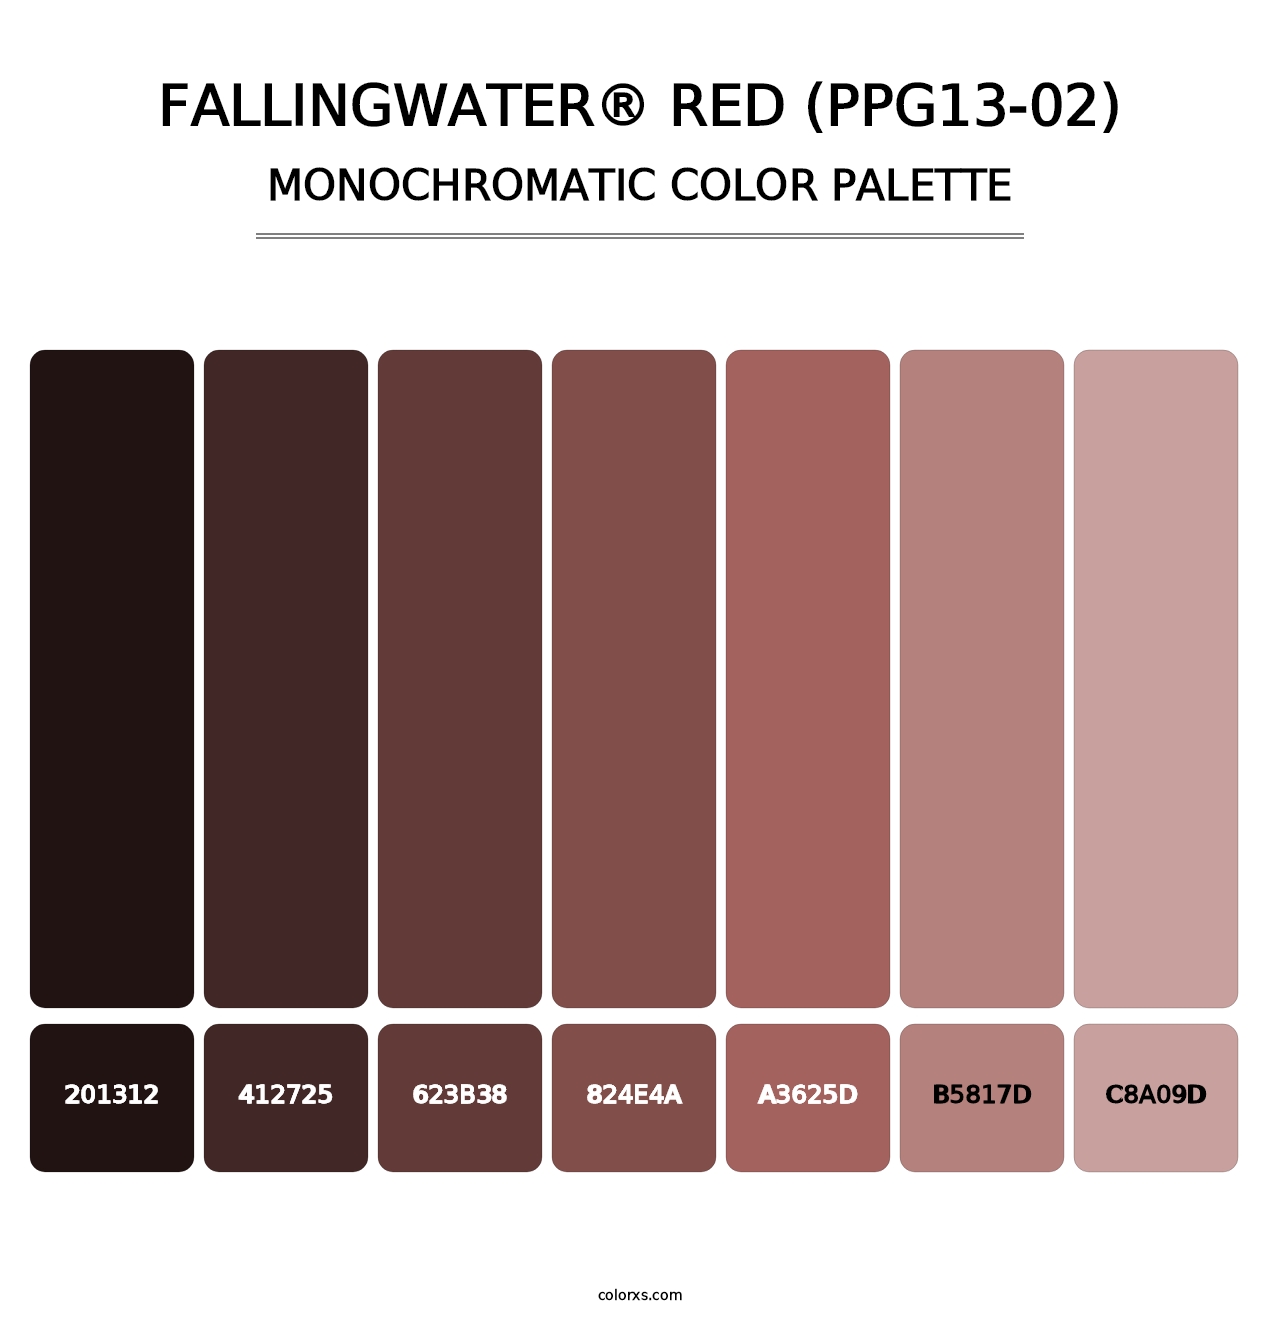 Fallingwater® Red (PPG13-02) - Monochromatic Color Palette